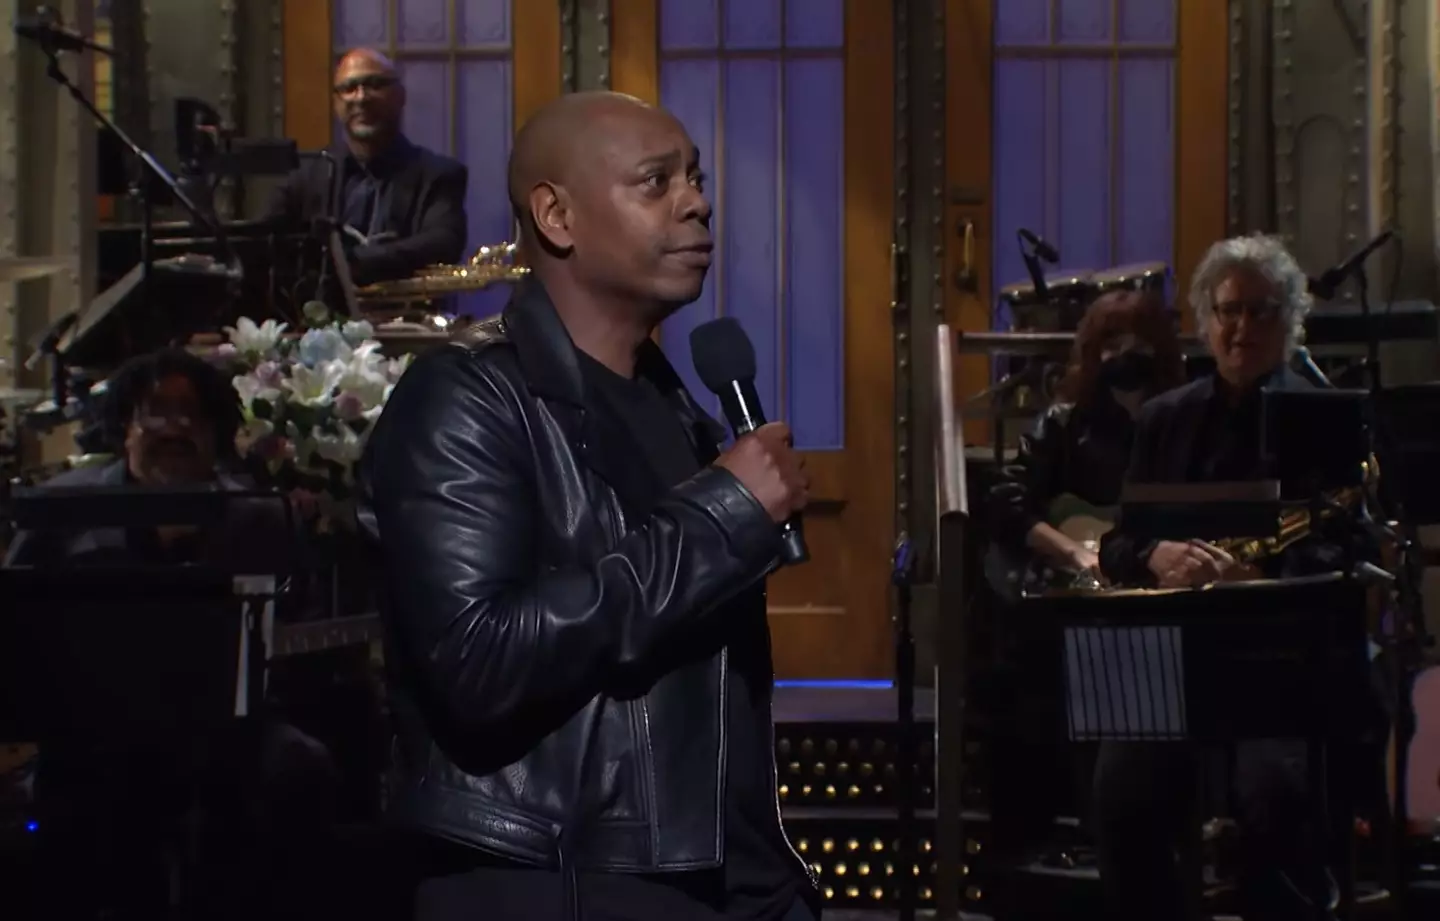 Dave Chappelle ended his SNL monologue by talking about cancel culture.